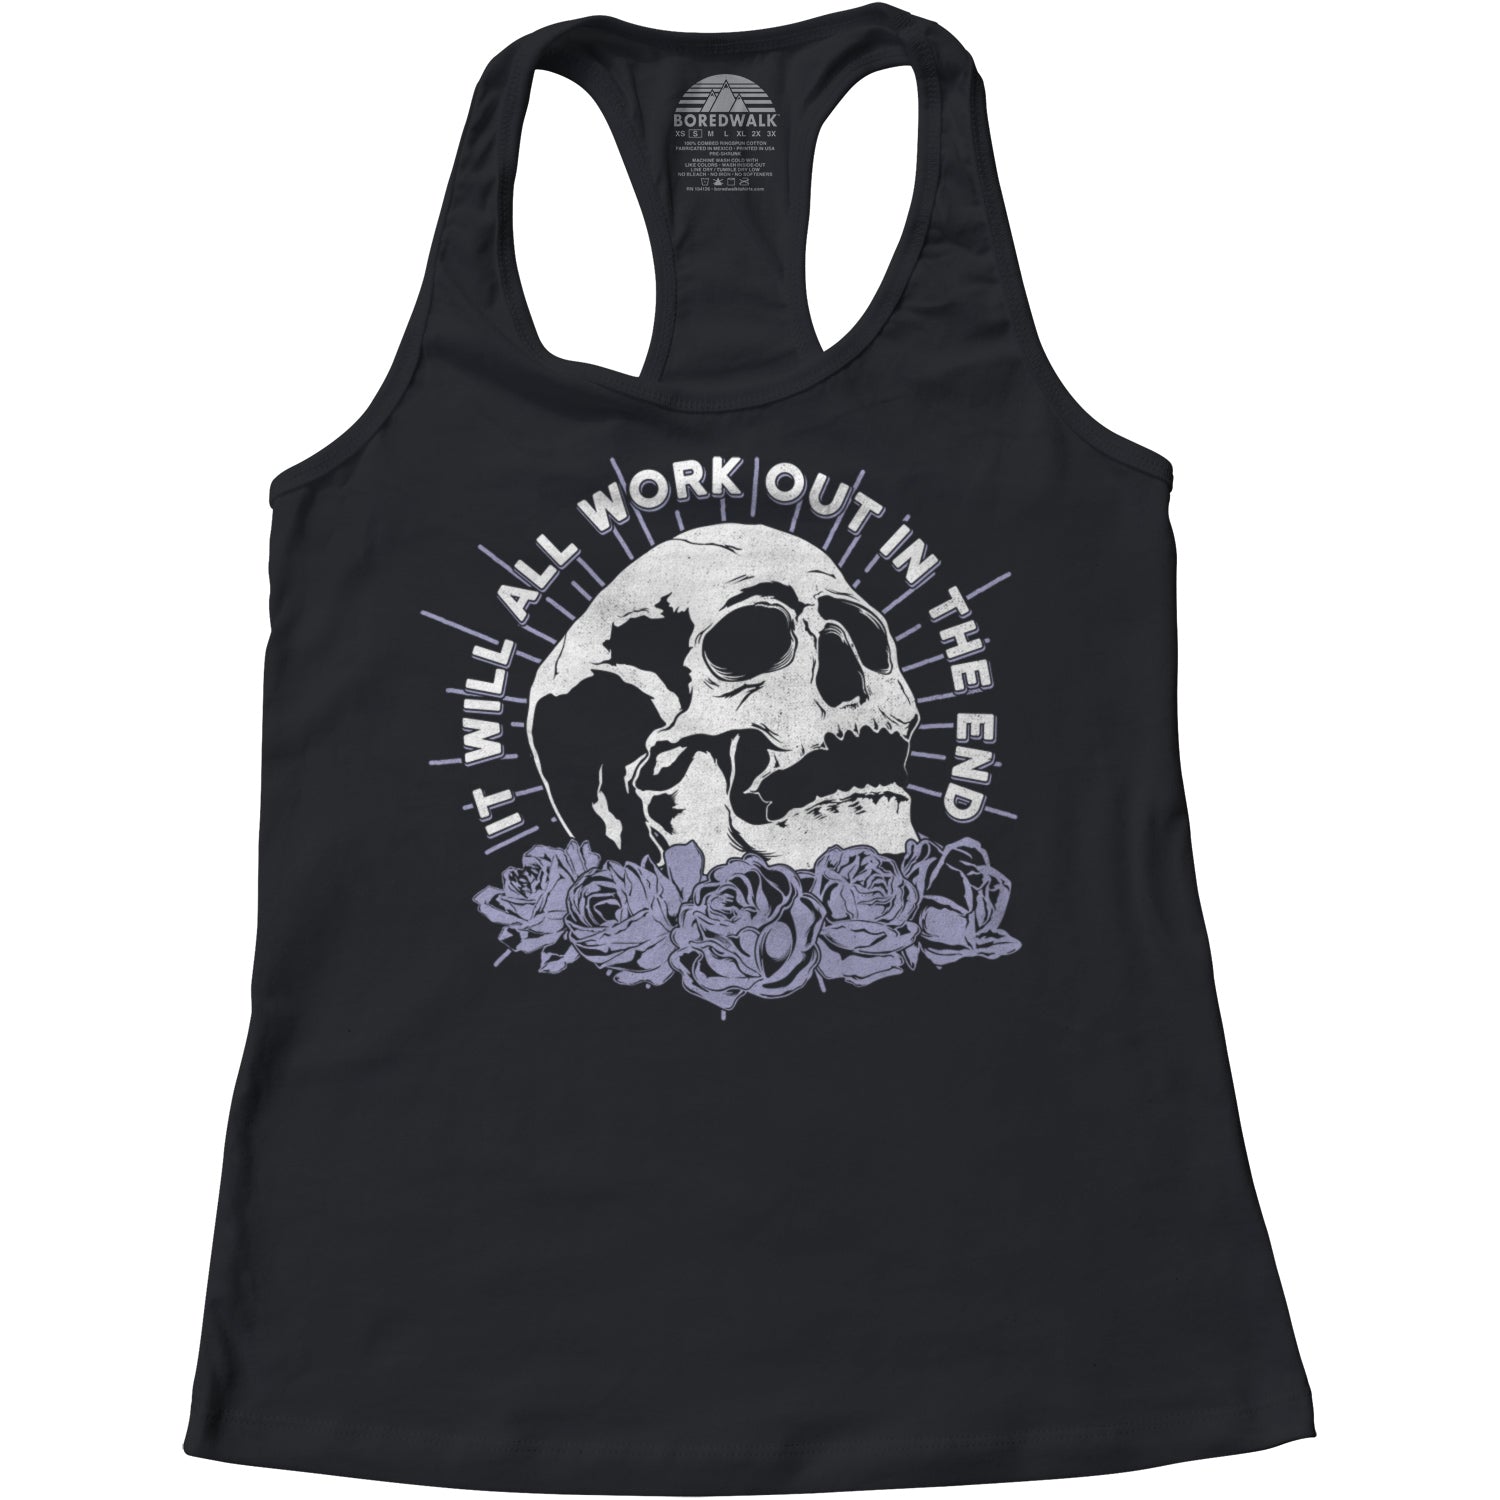 Women's It Will All Work Out In The End Racerback Tank Top - Boredwalk